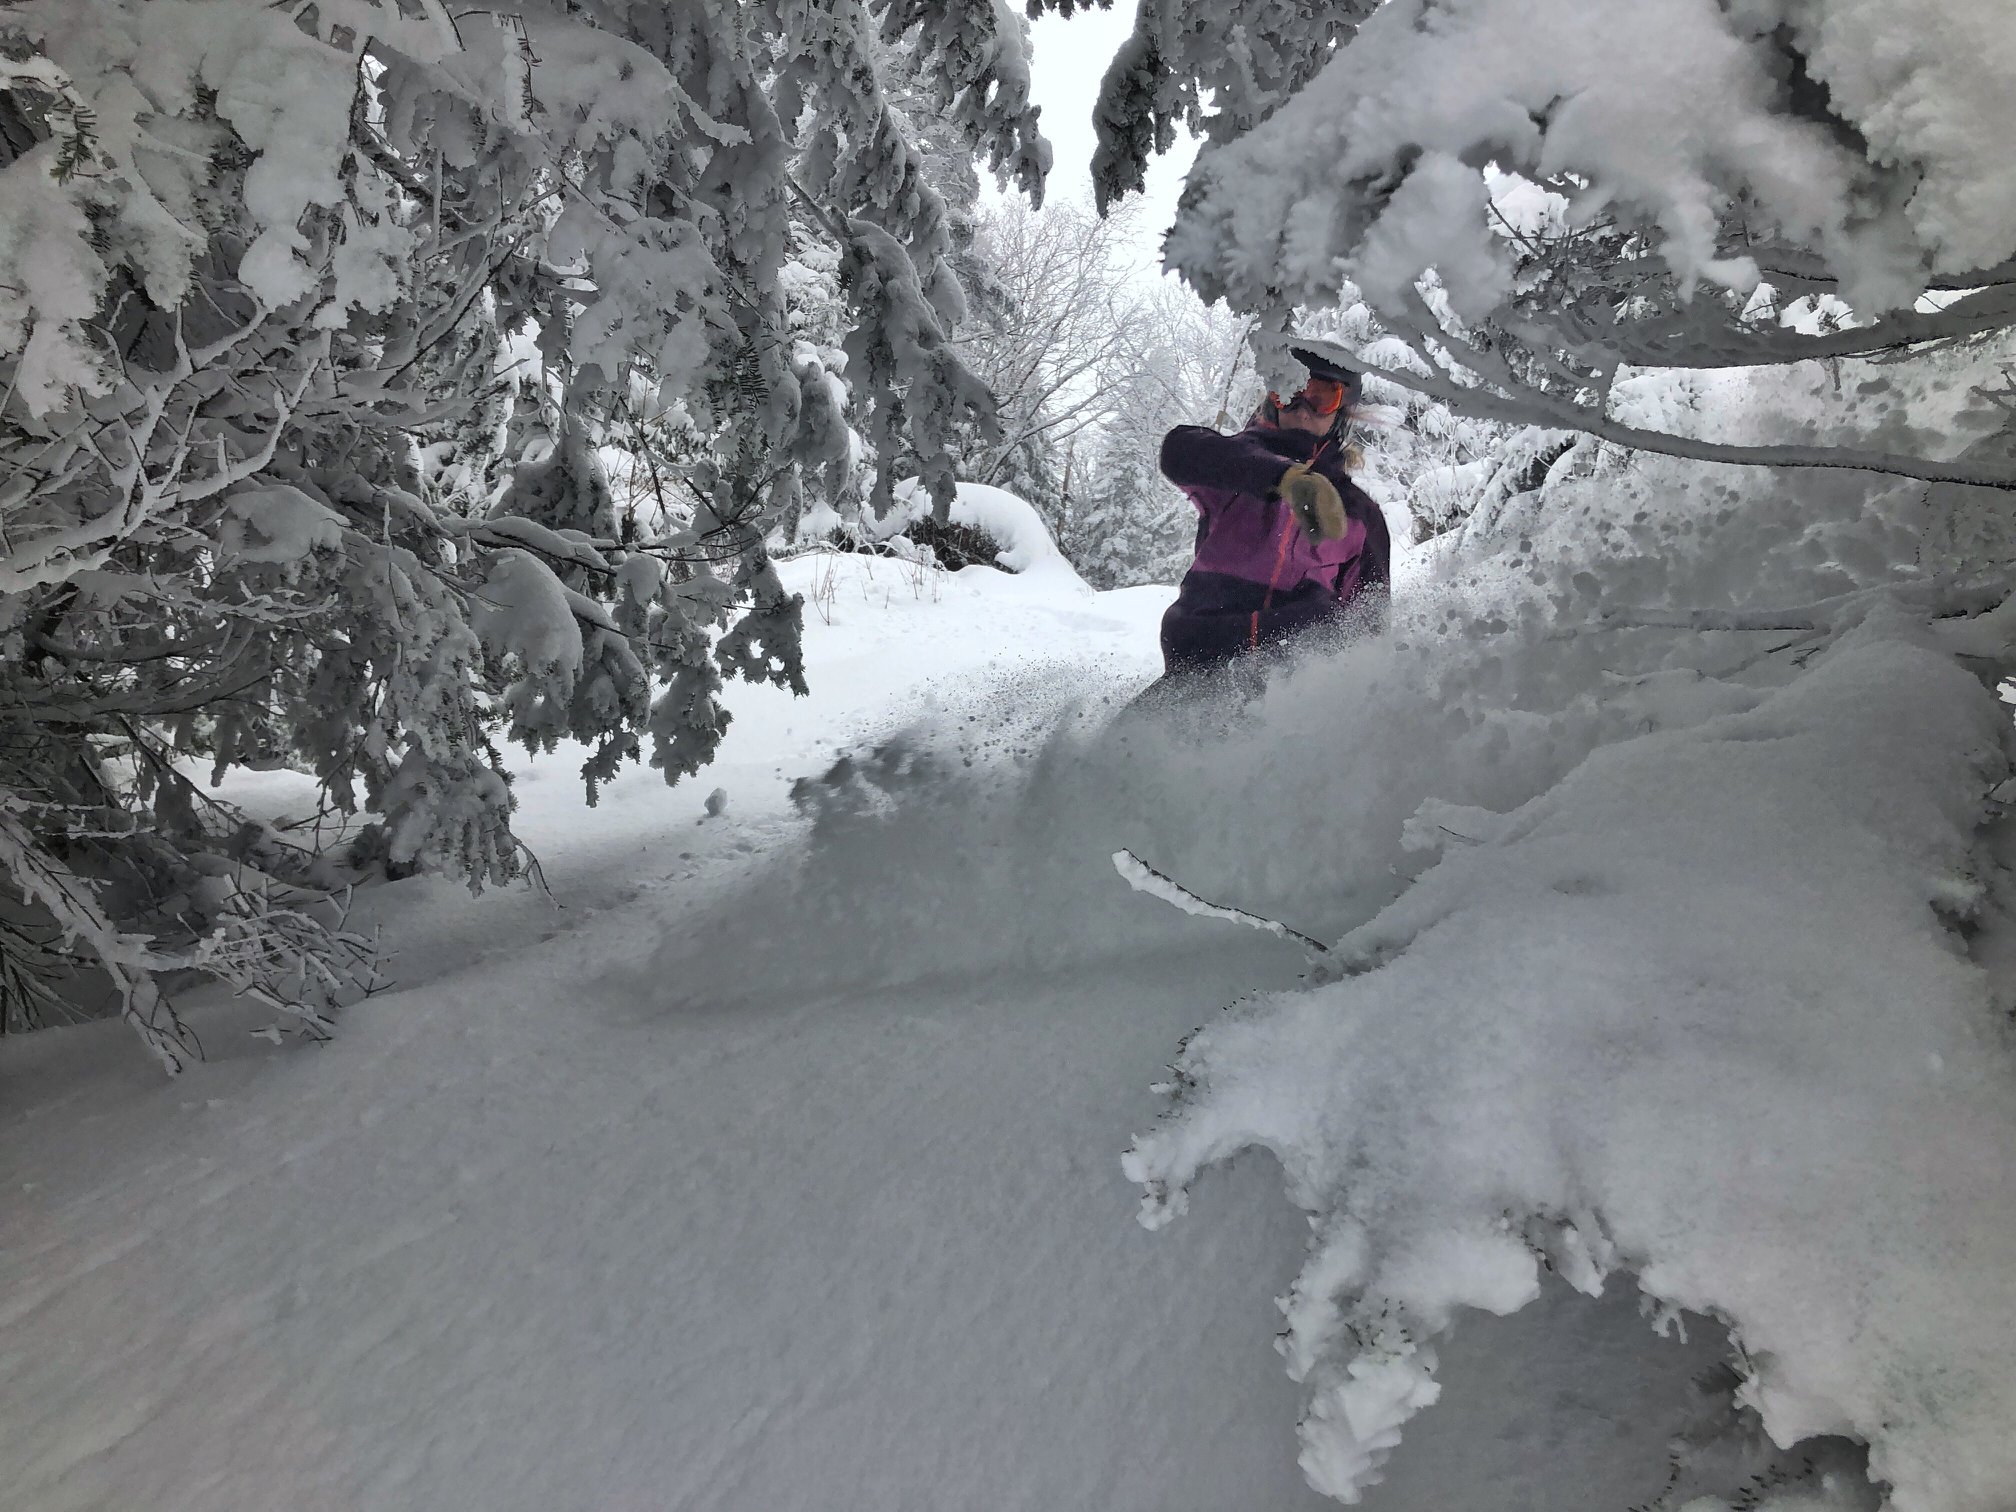 49cm (20") of snow in the past week, Smuggler's Notch